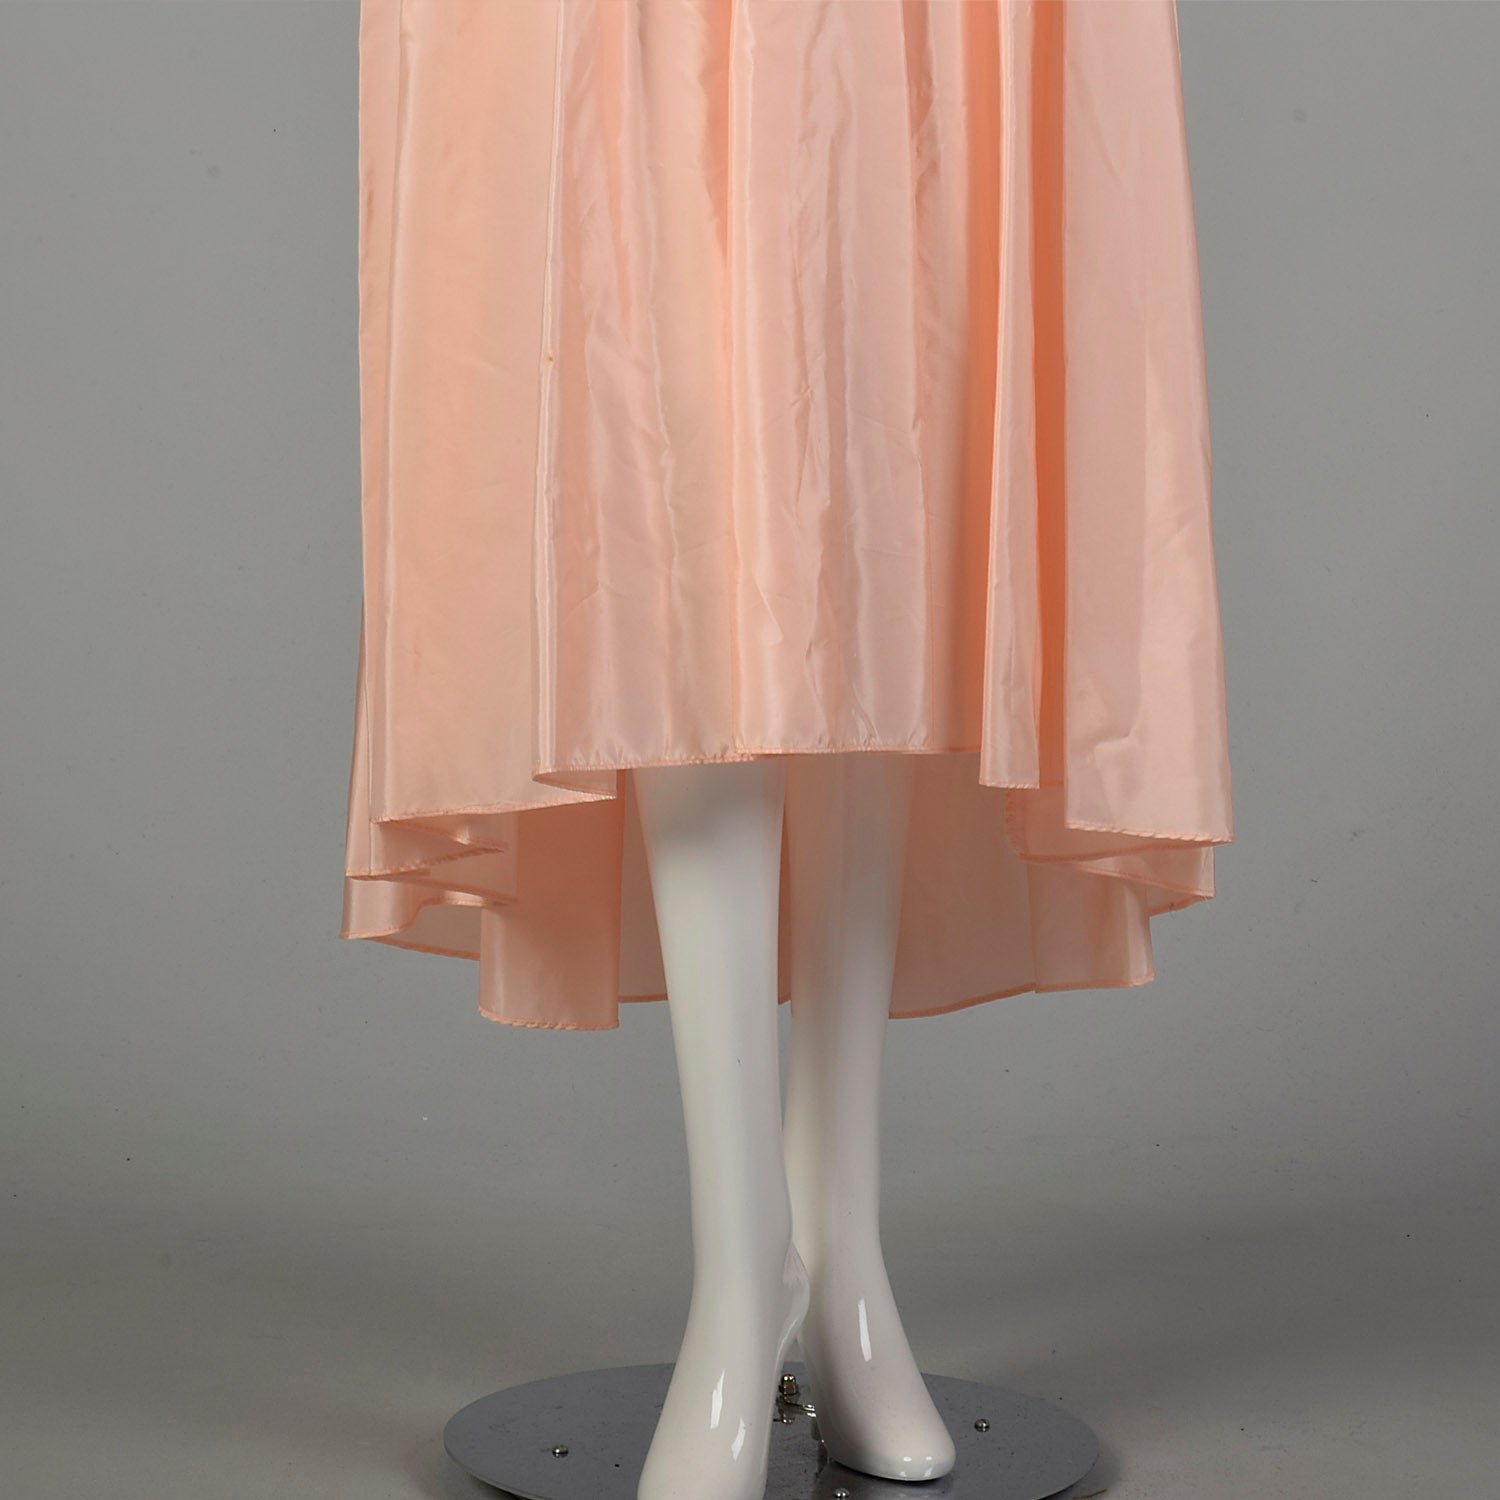 Small 1980s Alfred Angelo Prom Dress